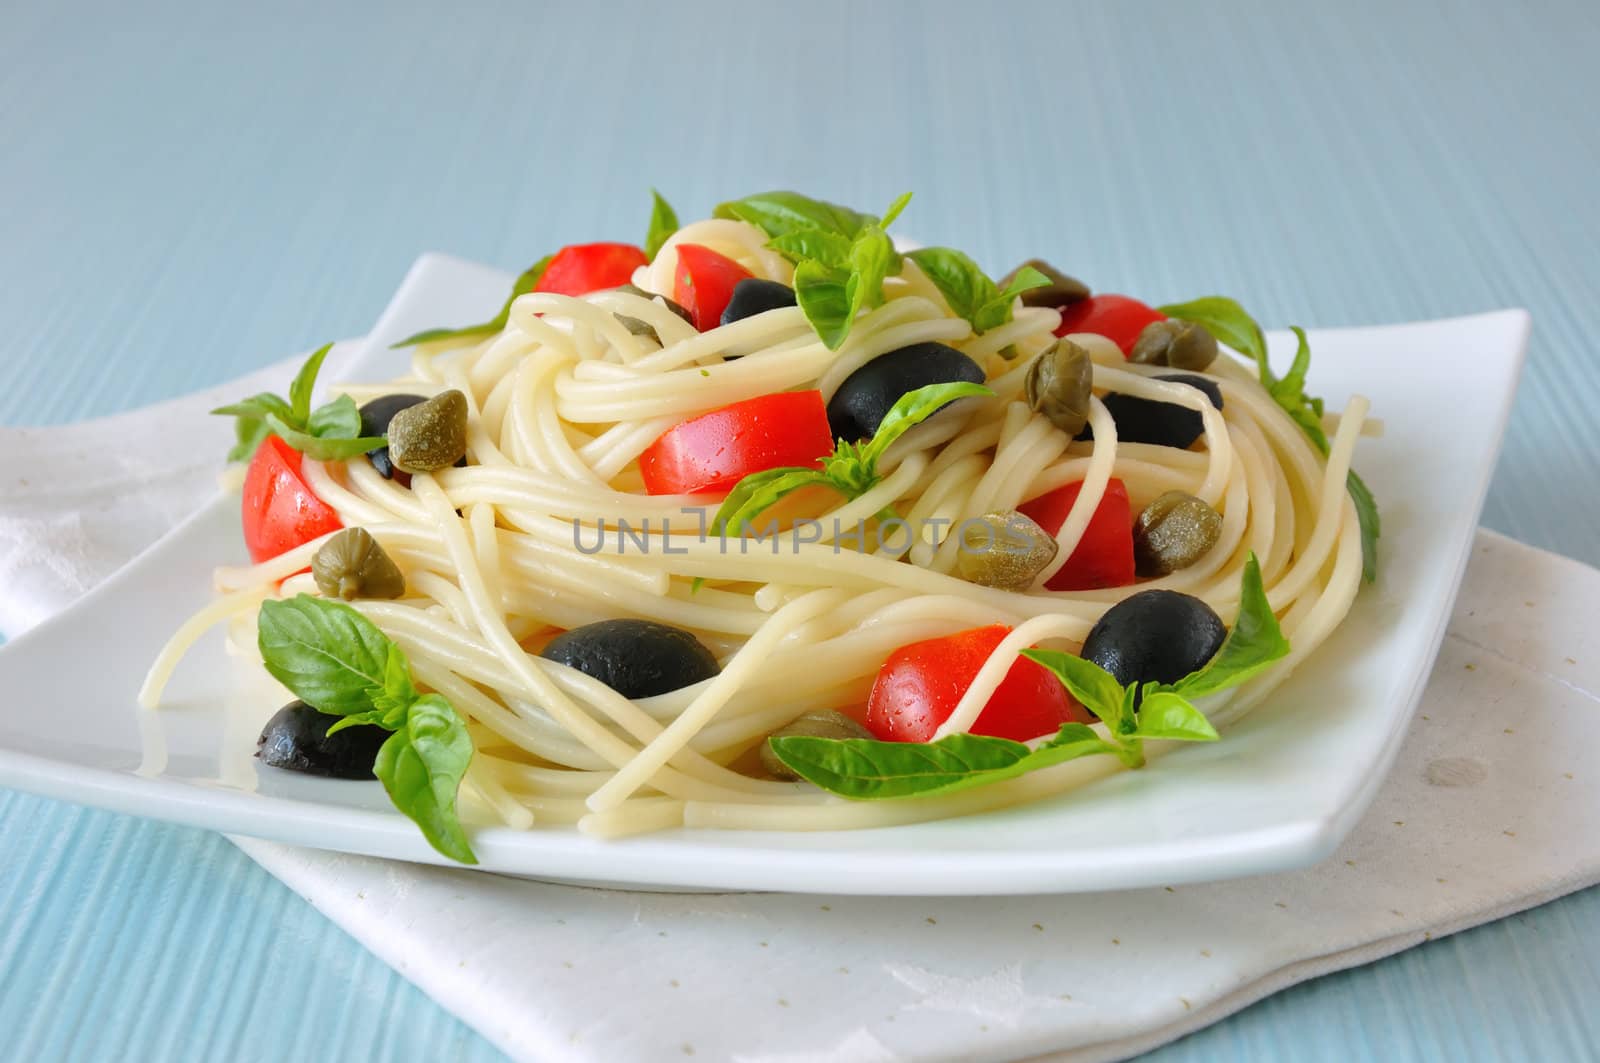 Spaghetti with tomato slices and olives, capers and basil